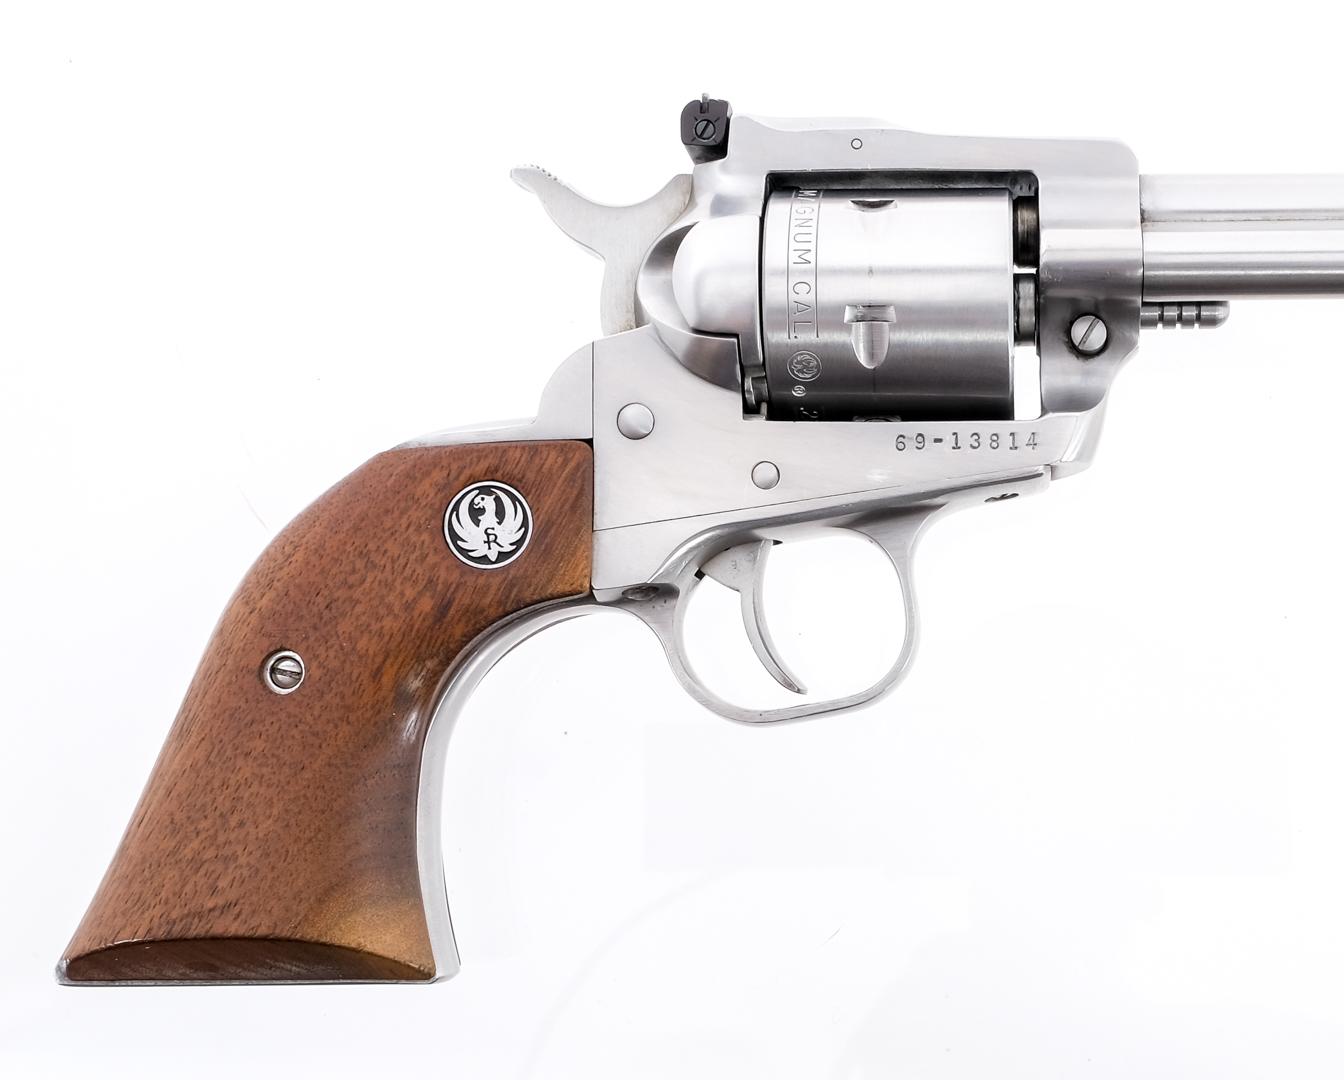 Ruger NM Single Six .22 Win Mag Revolver